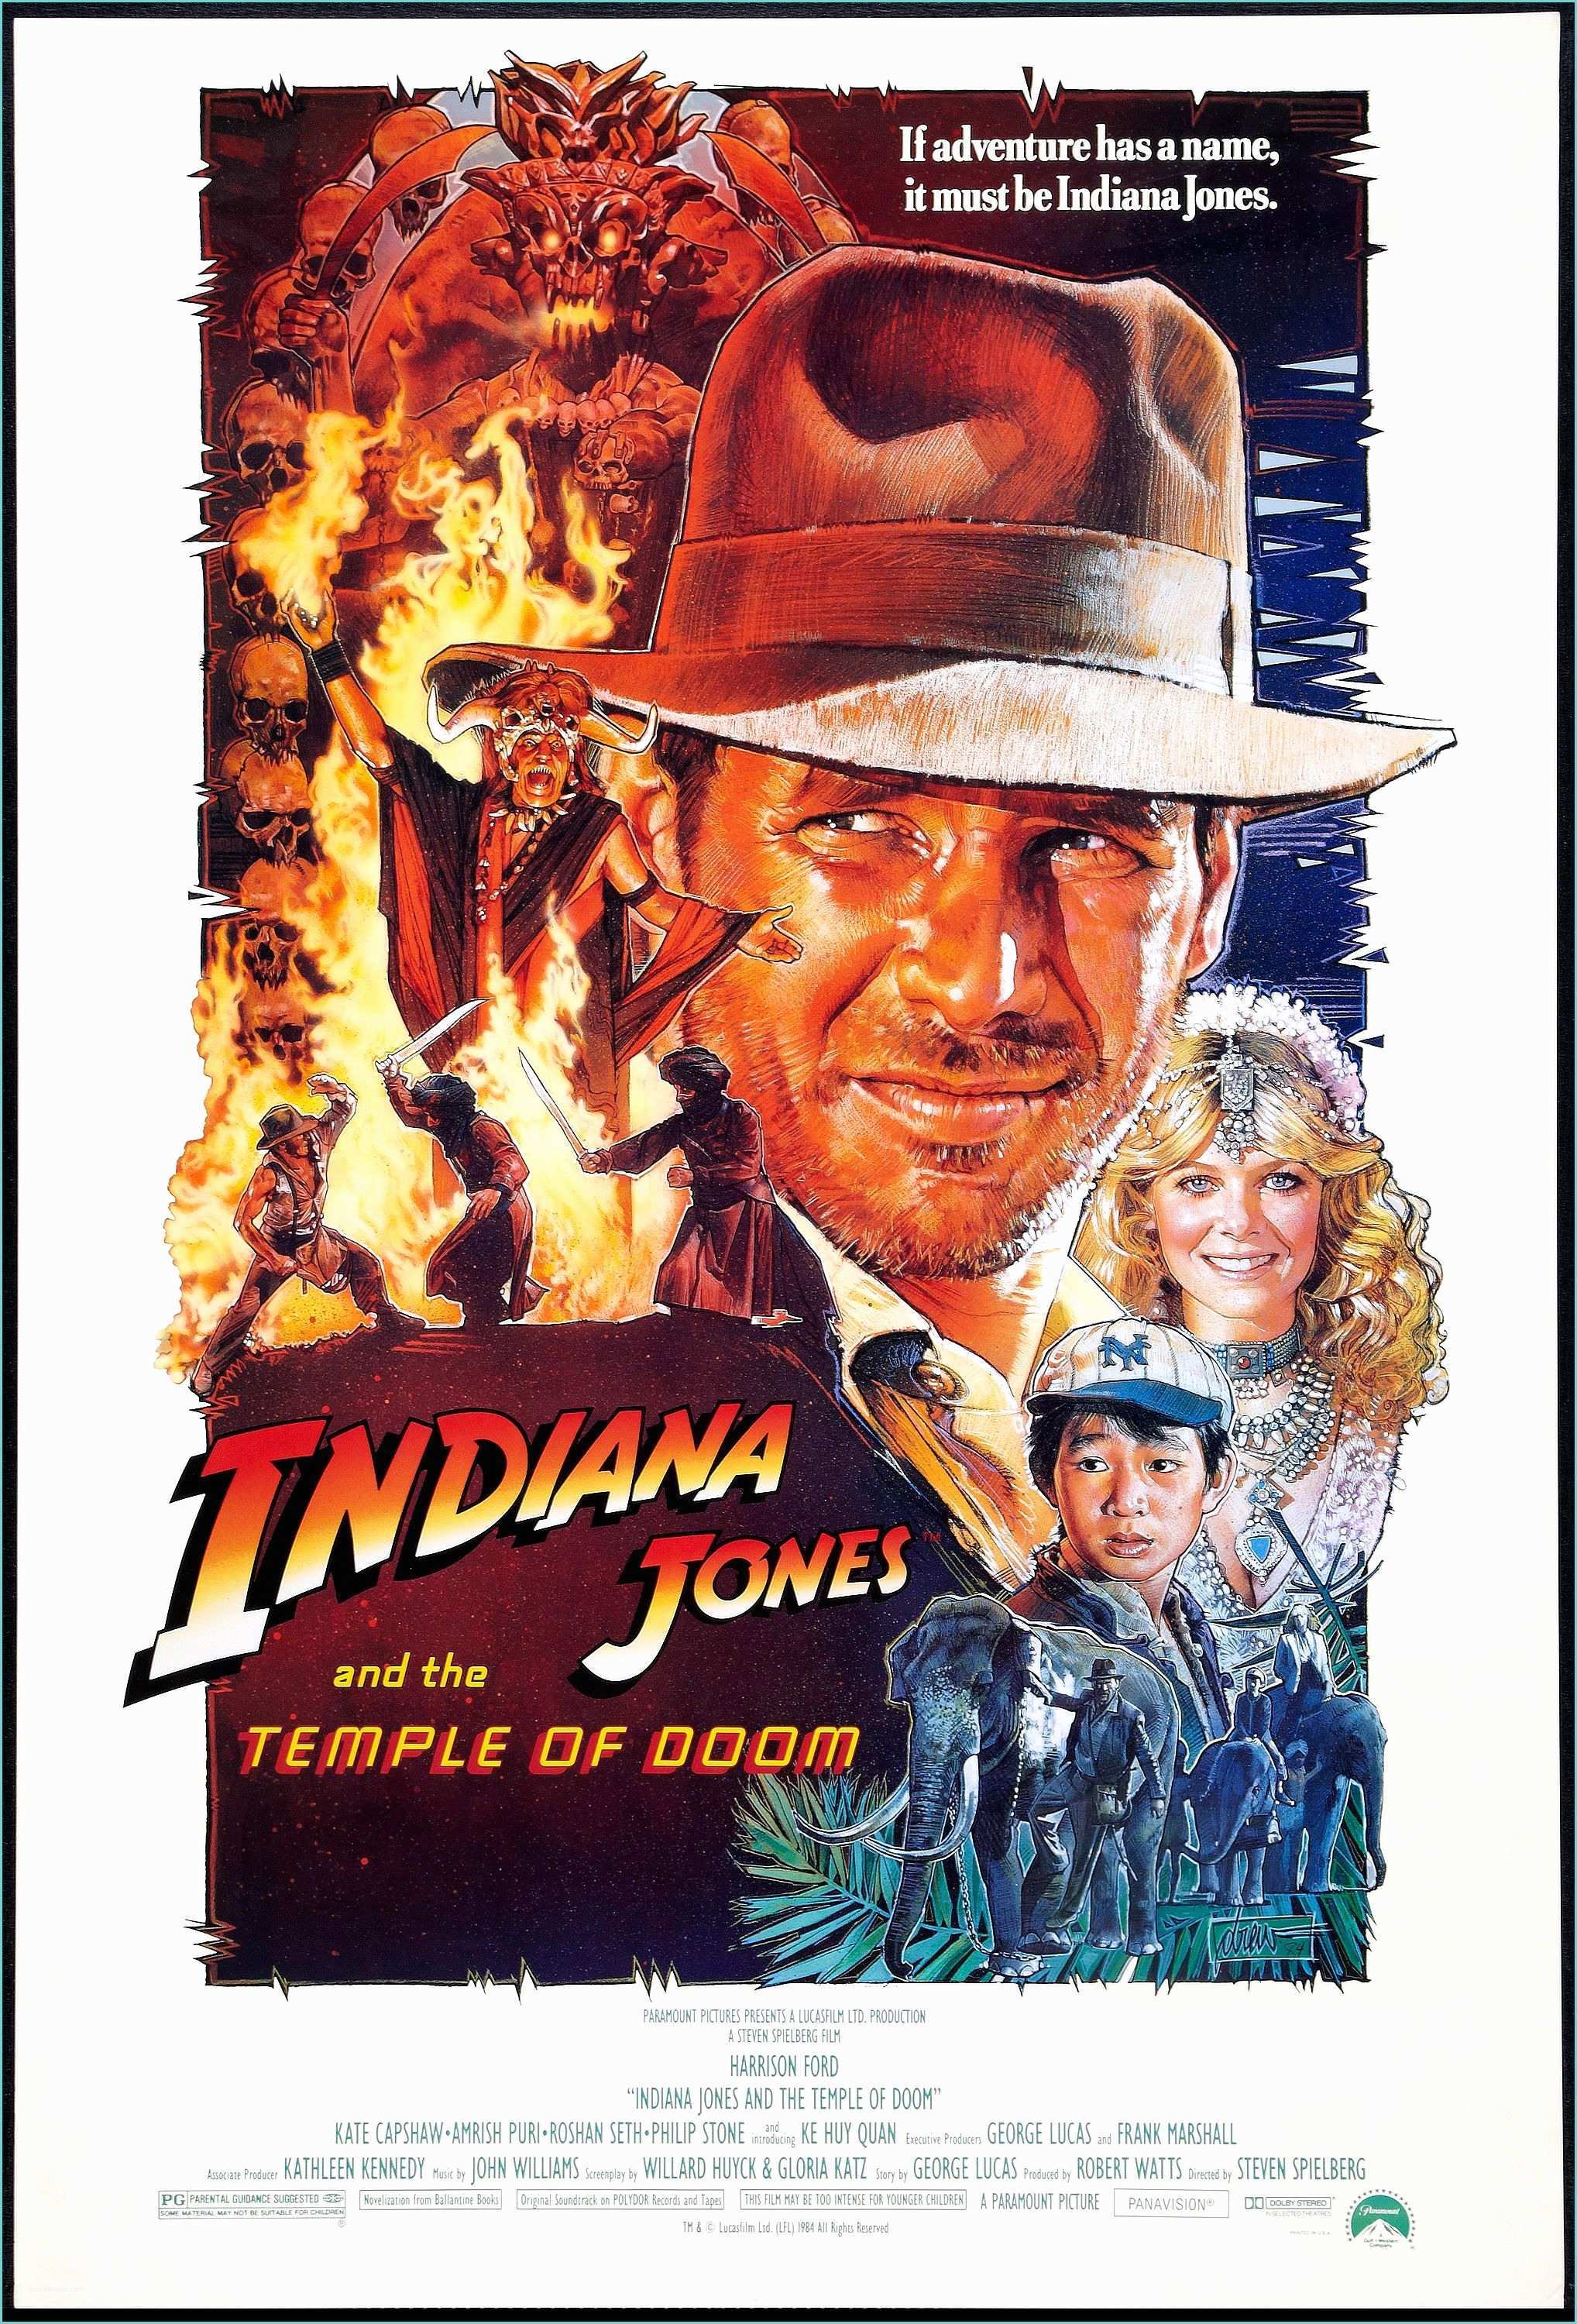 Allposters Return Policy Indiana Jones and the Temple Of Doom 1984 Poster Restoration